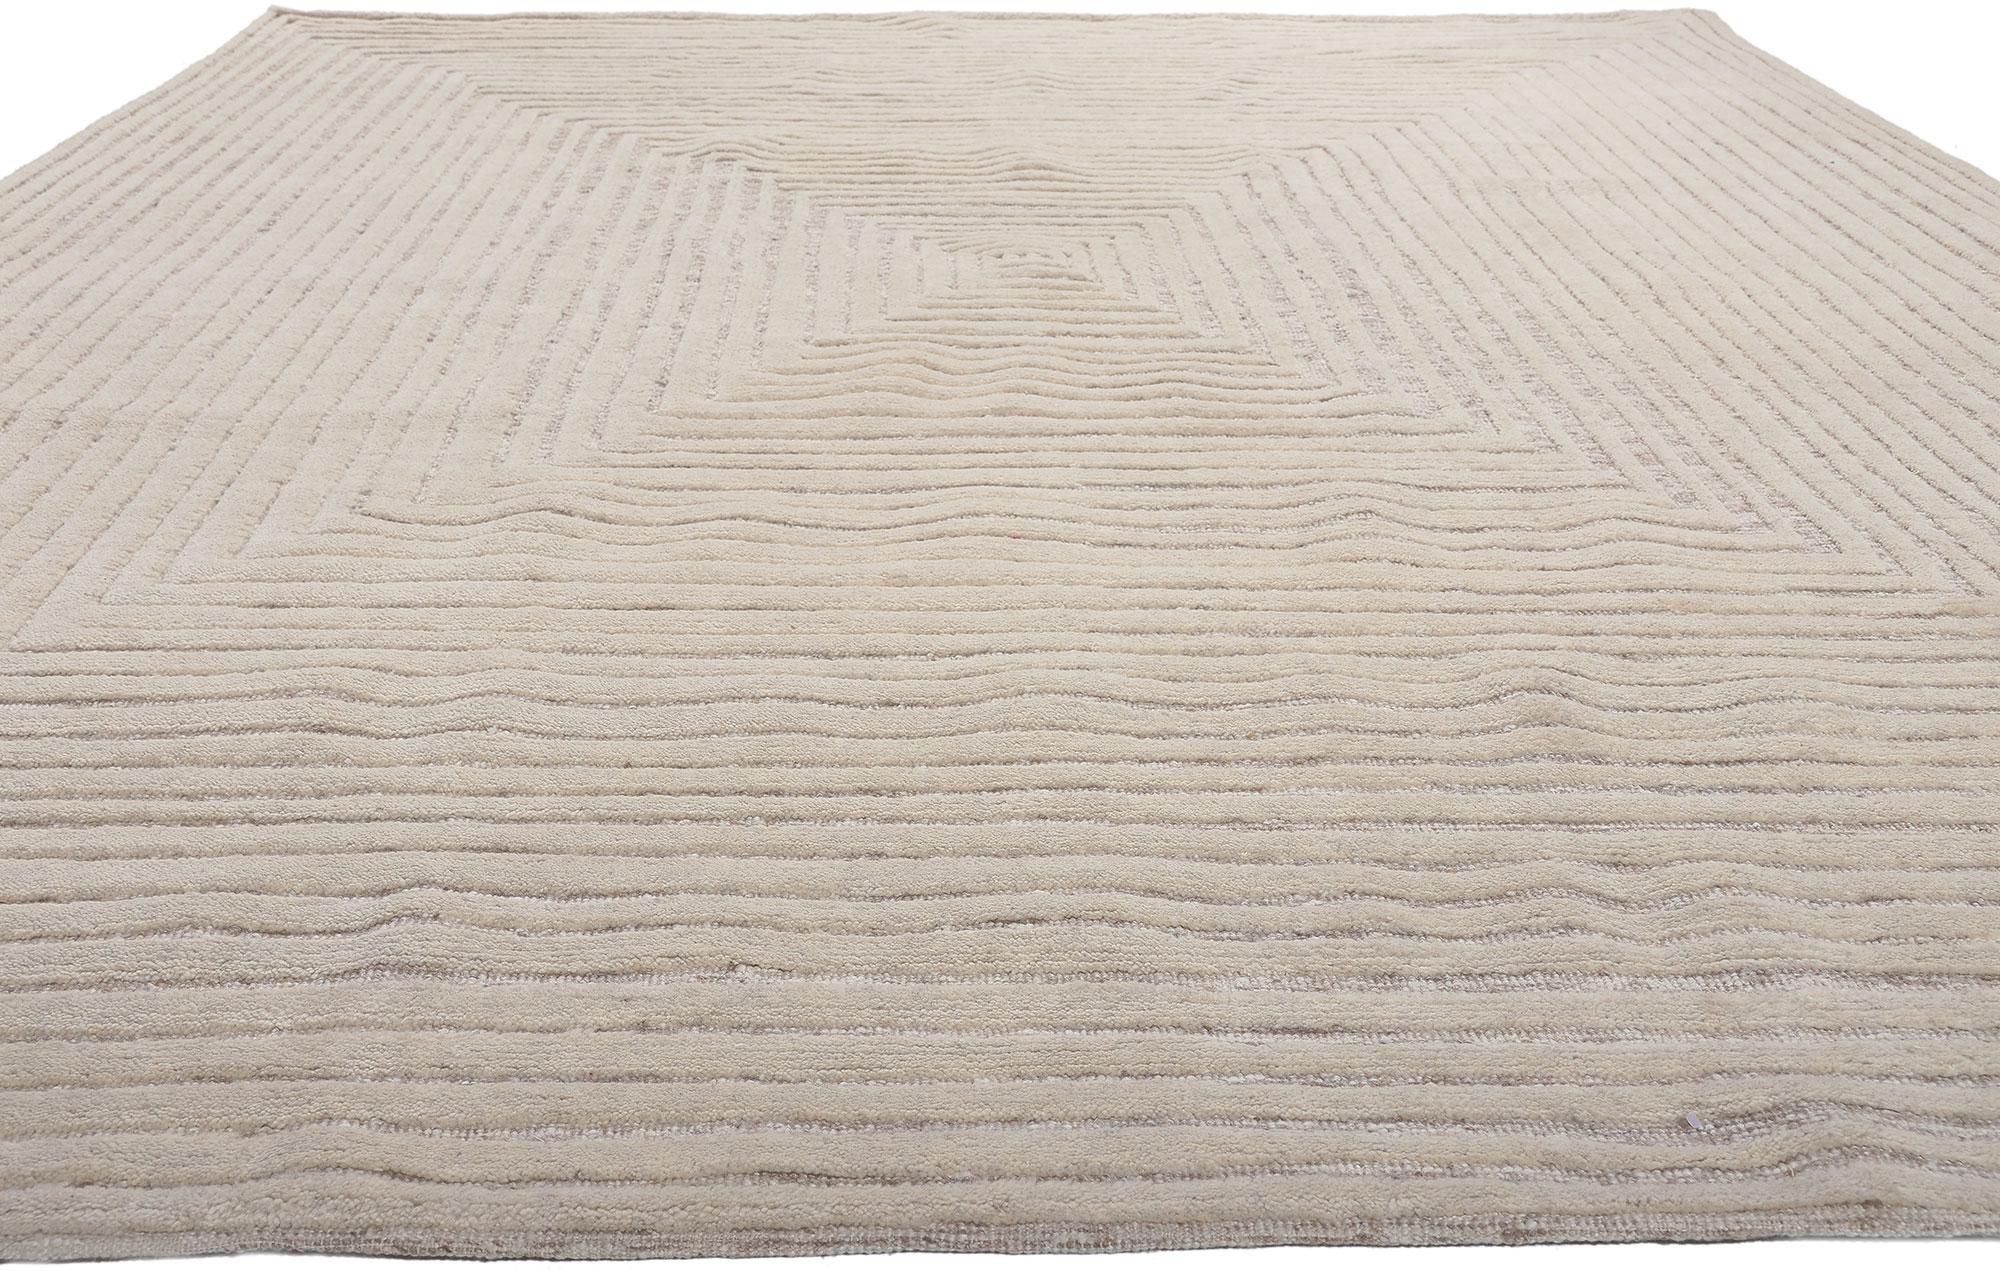 Minimalist Modern Textured High-Low Rug, Sublime Simplicity Meets Tantalizing Texture